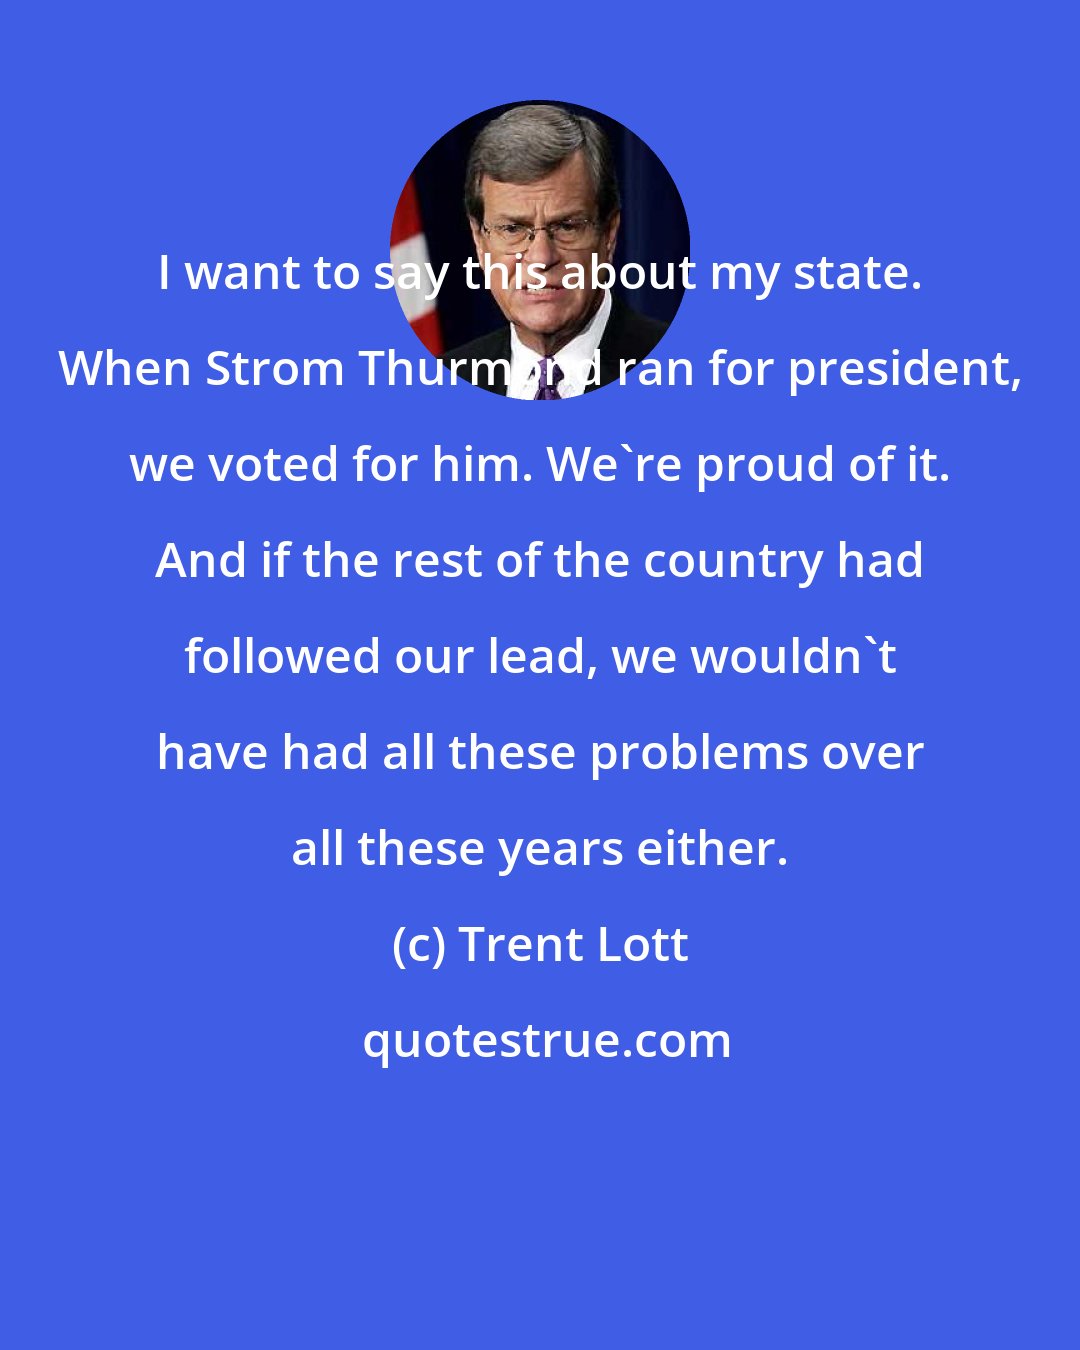 Trent Lott: I want to say this about my state. When Strom Thurmond ran for president, we voted for him. We're proud of it. And if the rest of the country had followed our lead, we wouldn't have had all these problems over all these years either.